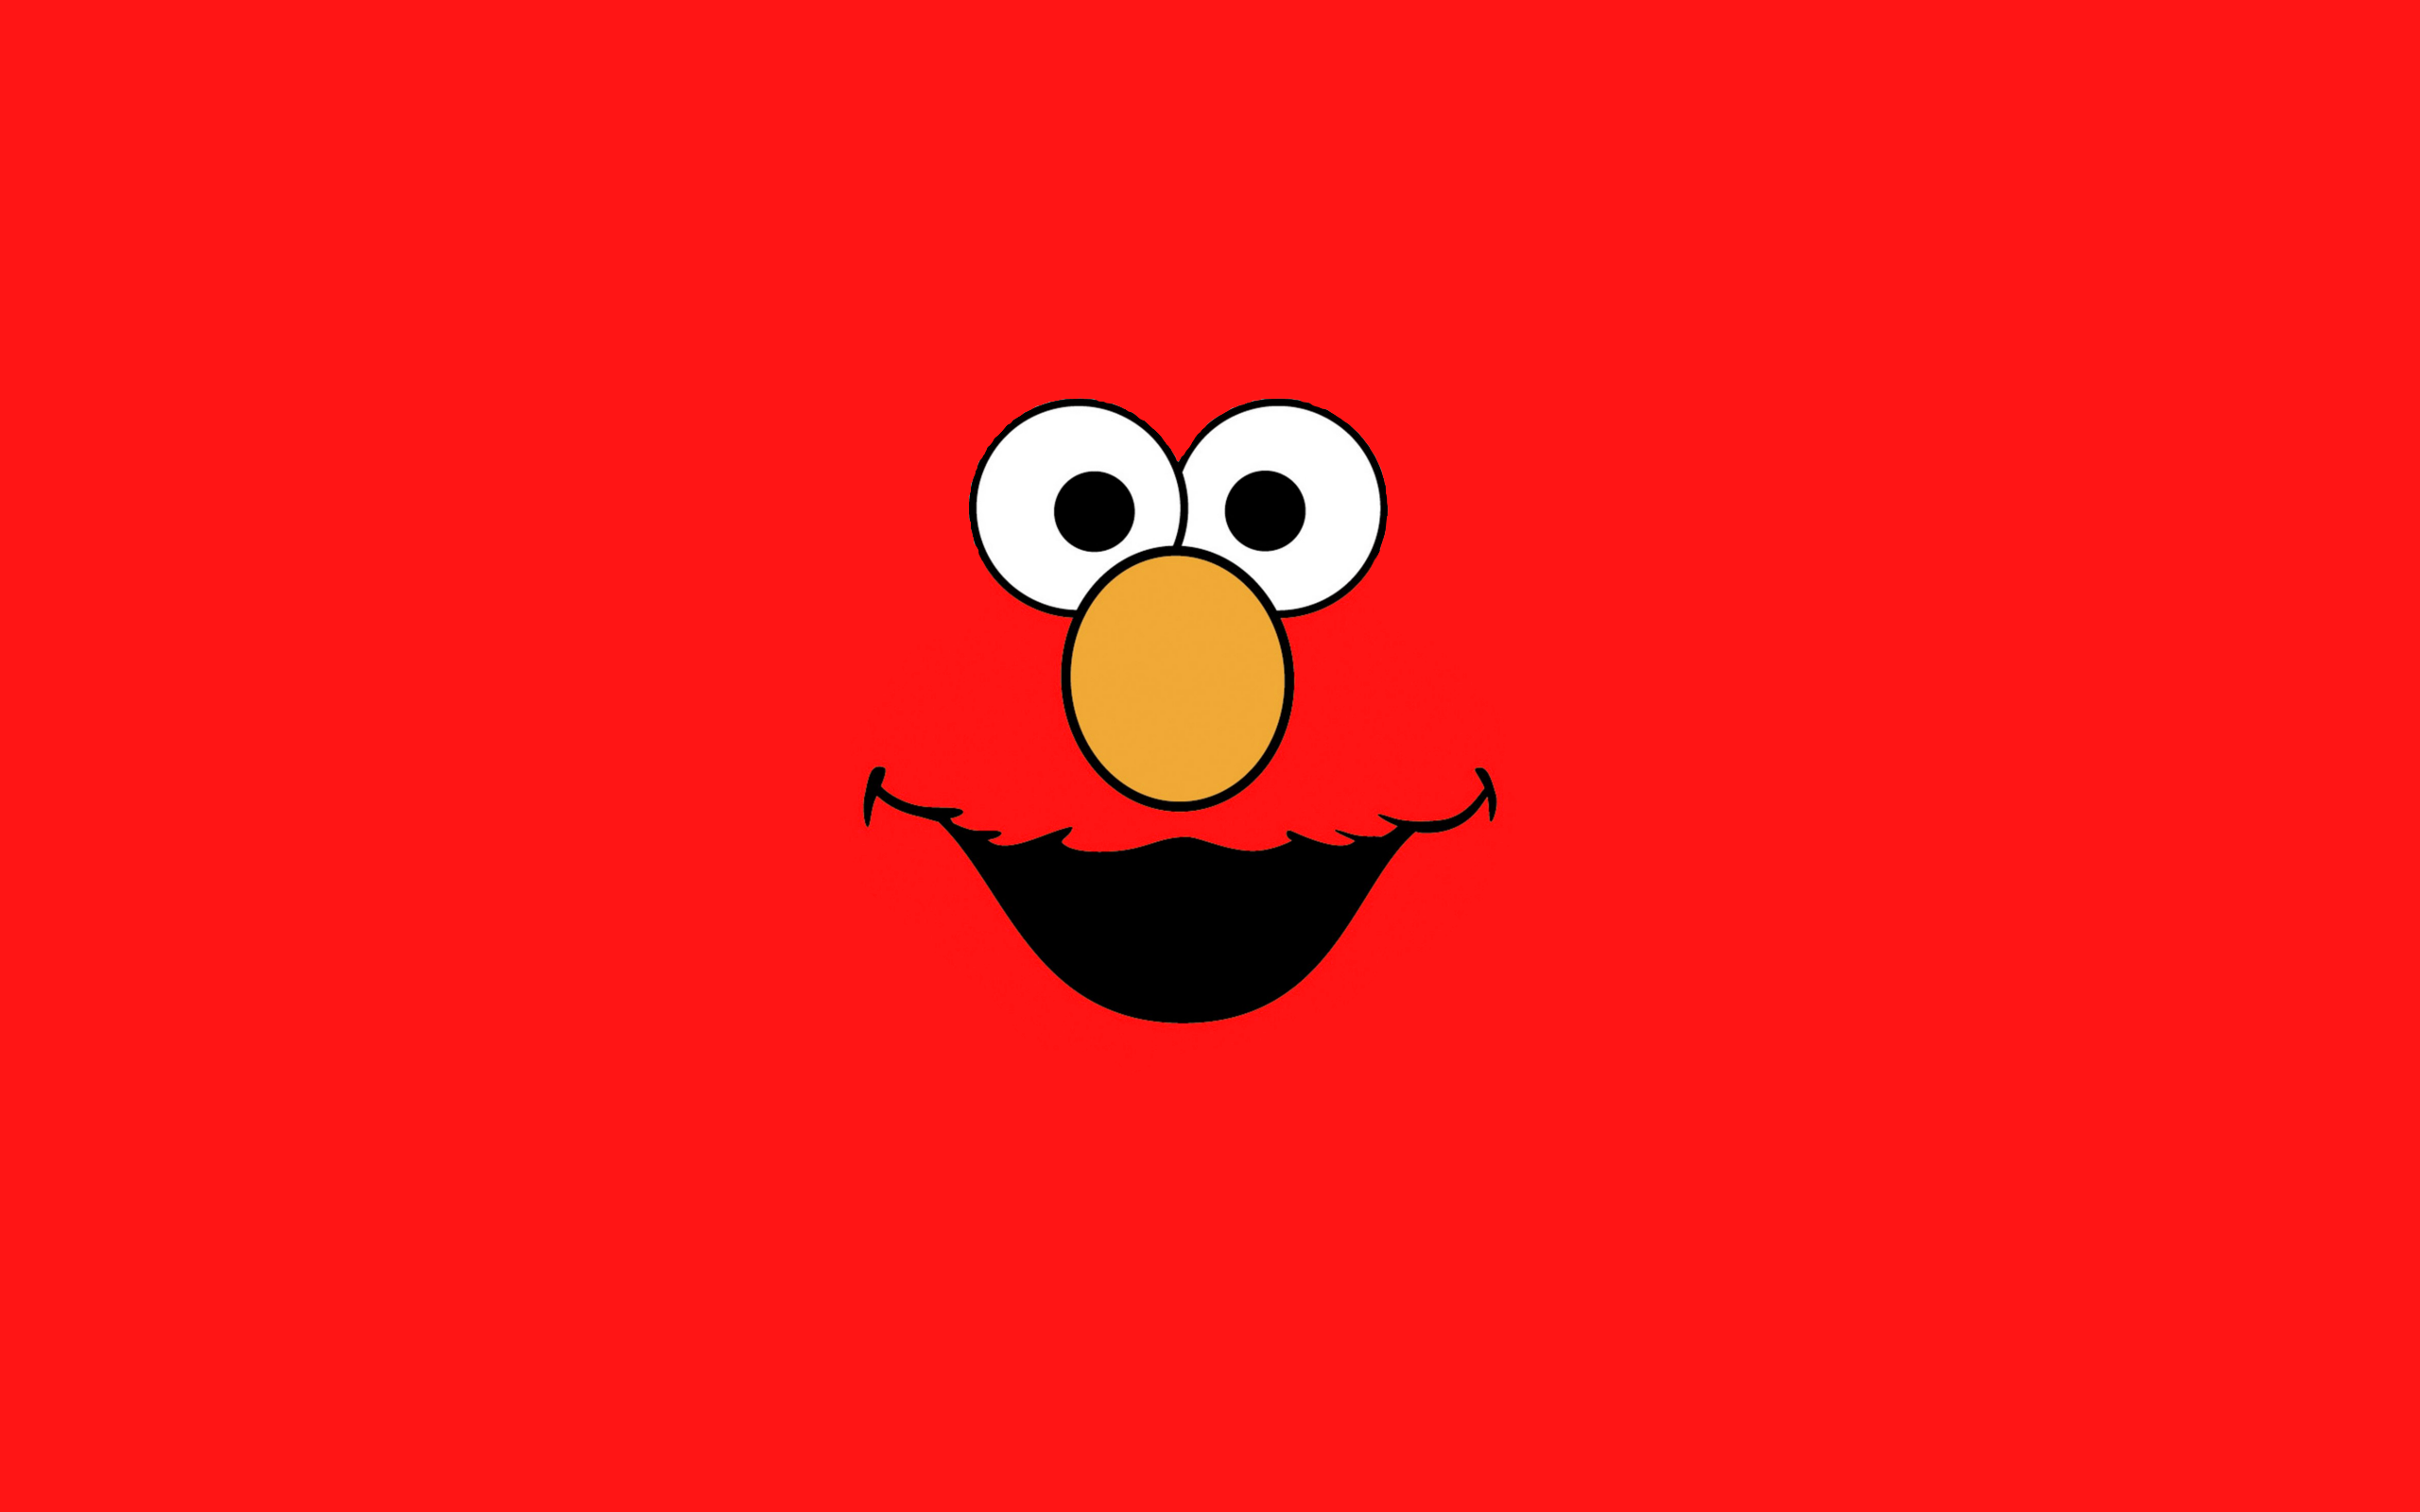 General 2560x1600 Elmo face simple background red background